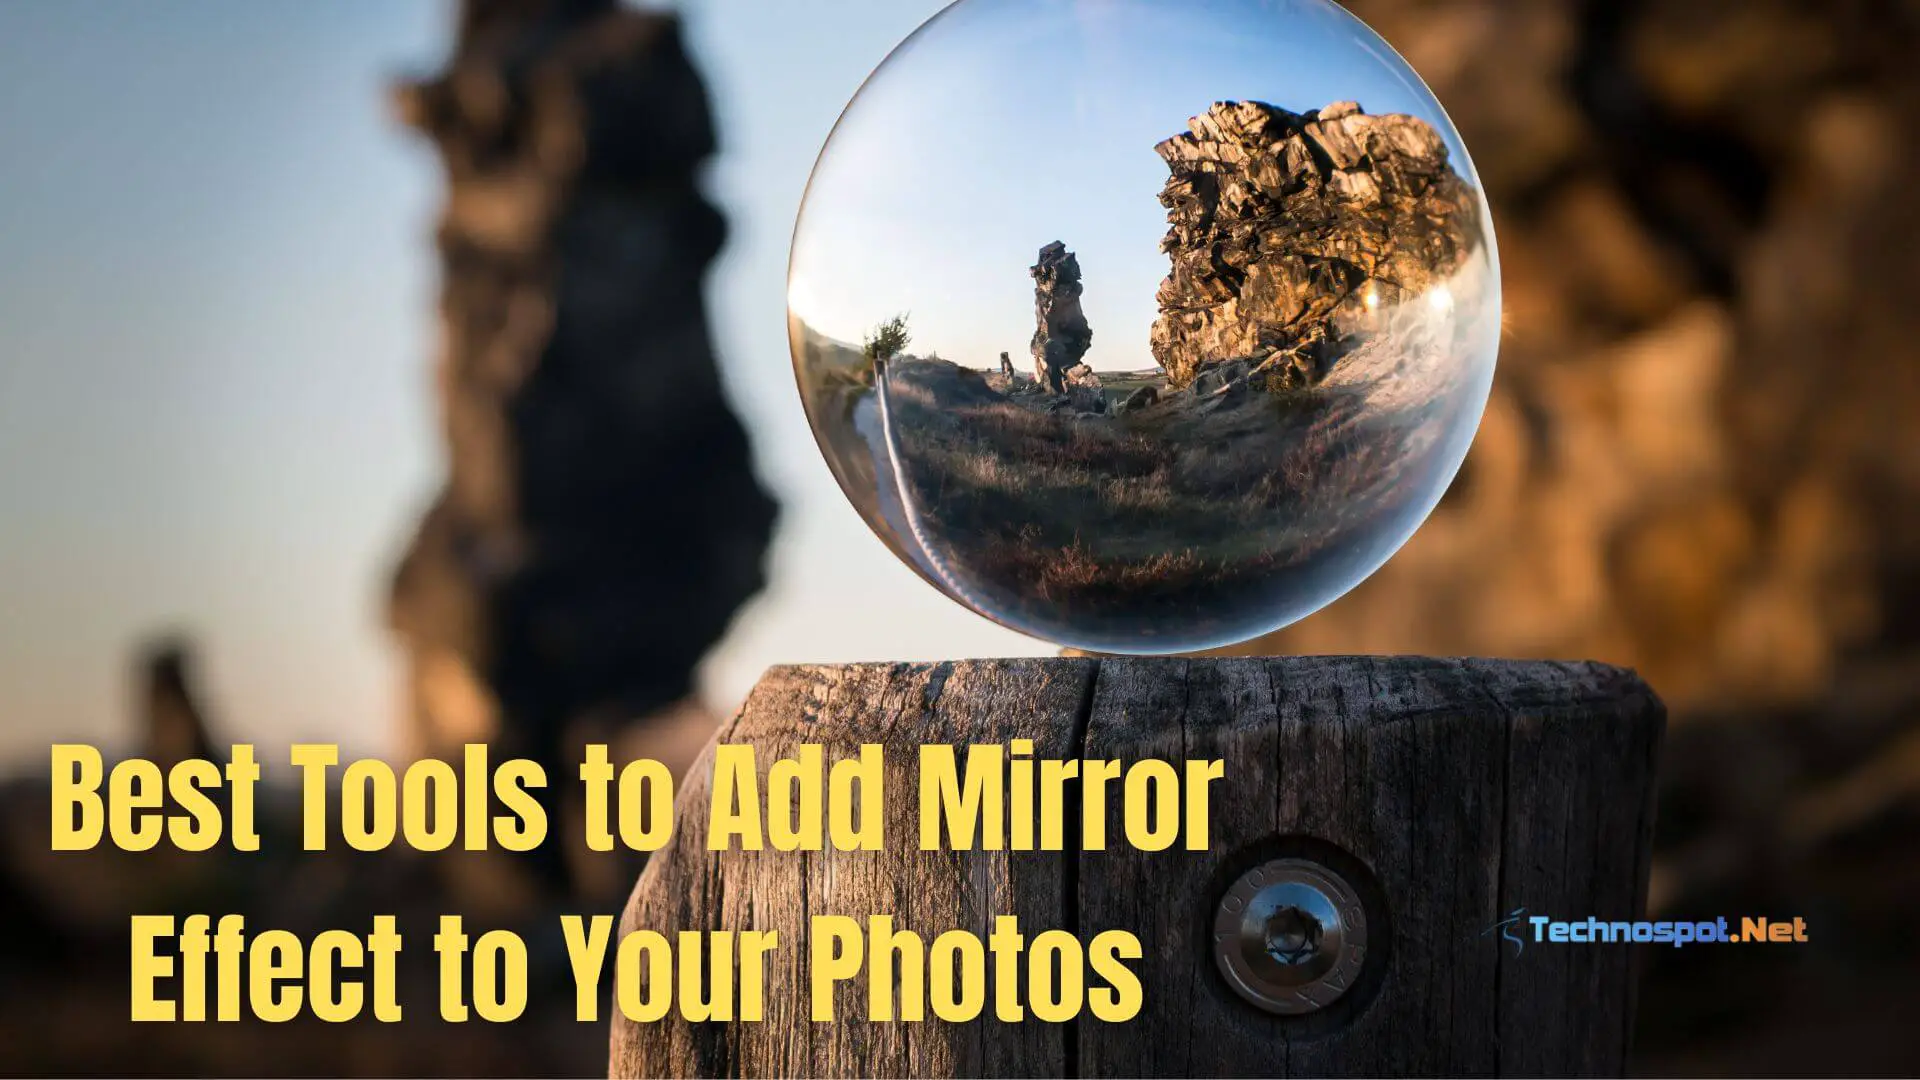 Best Tools to Add Mirror Effect to Your Photos